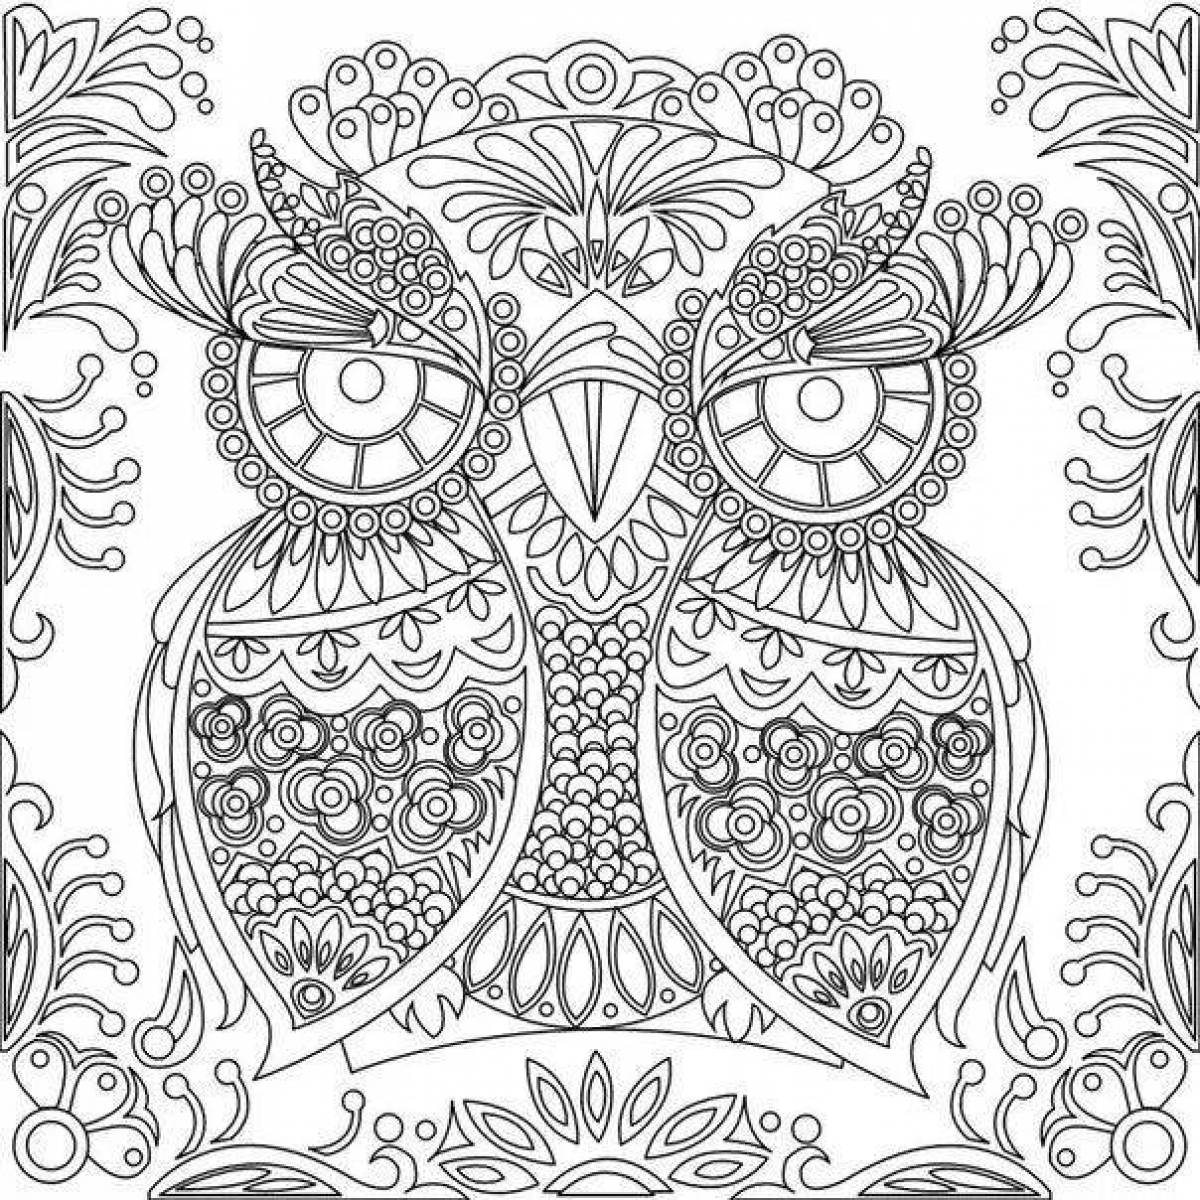 Stress treatment coloring page